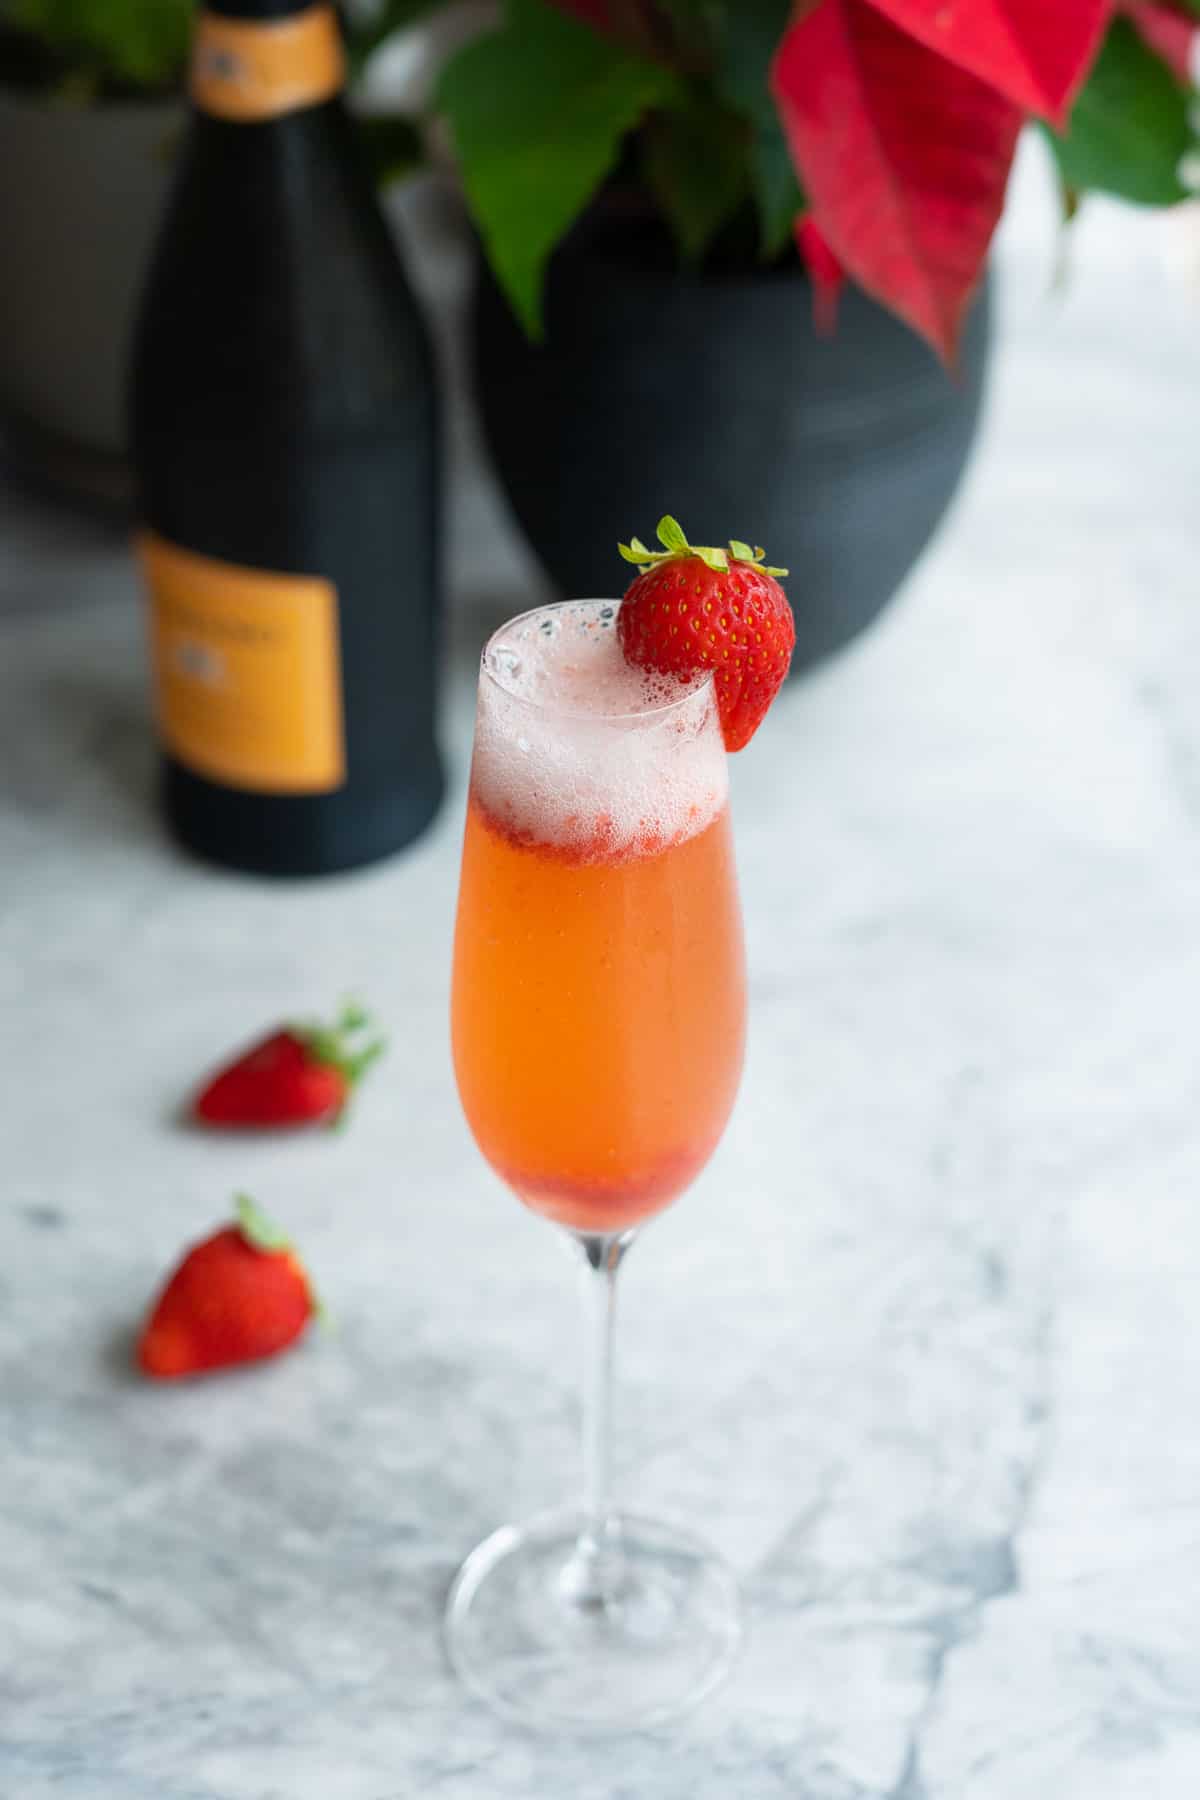 A champagne flute of rossini cocktail garnished with a strawberry on the rim of the glass.